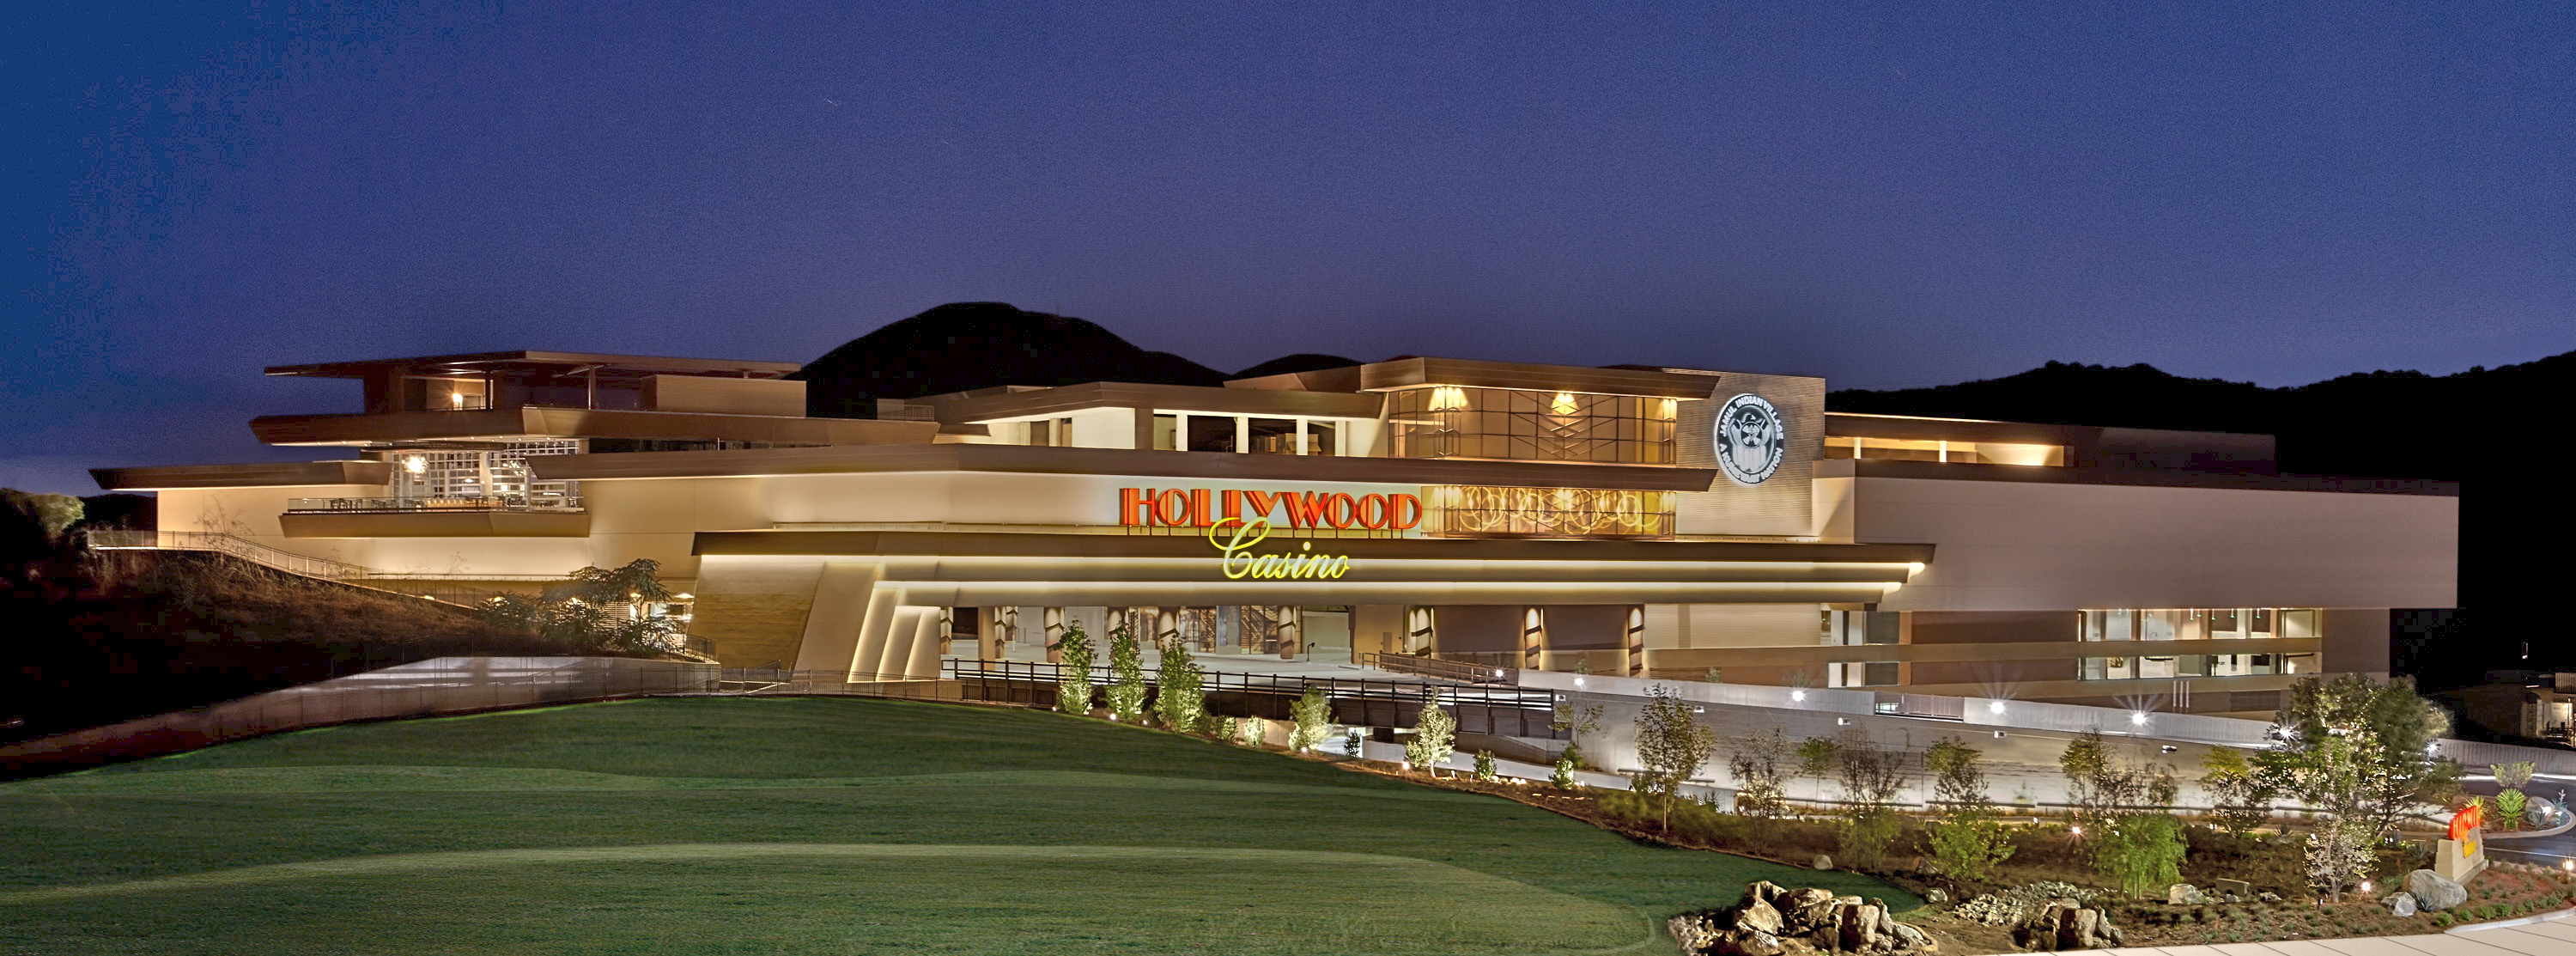 The Hollywood Jamul-San Diego Casino is located off of the two-lane state Route 94